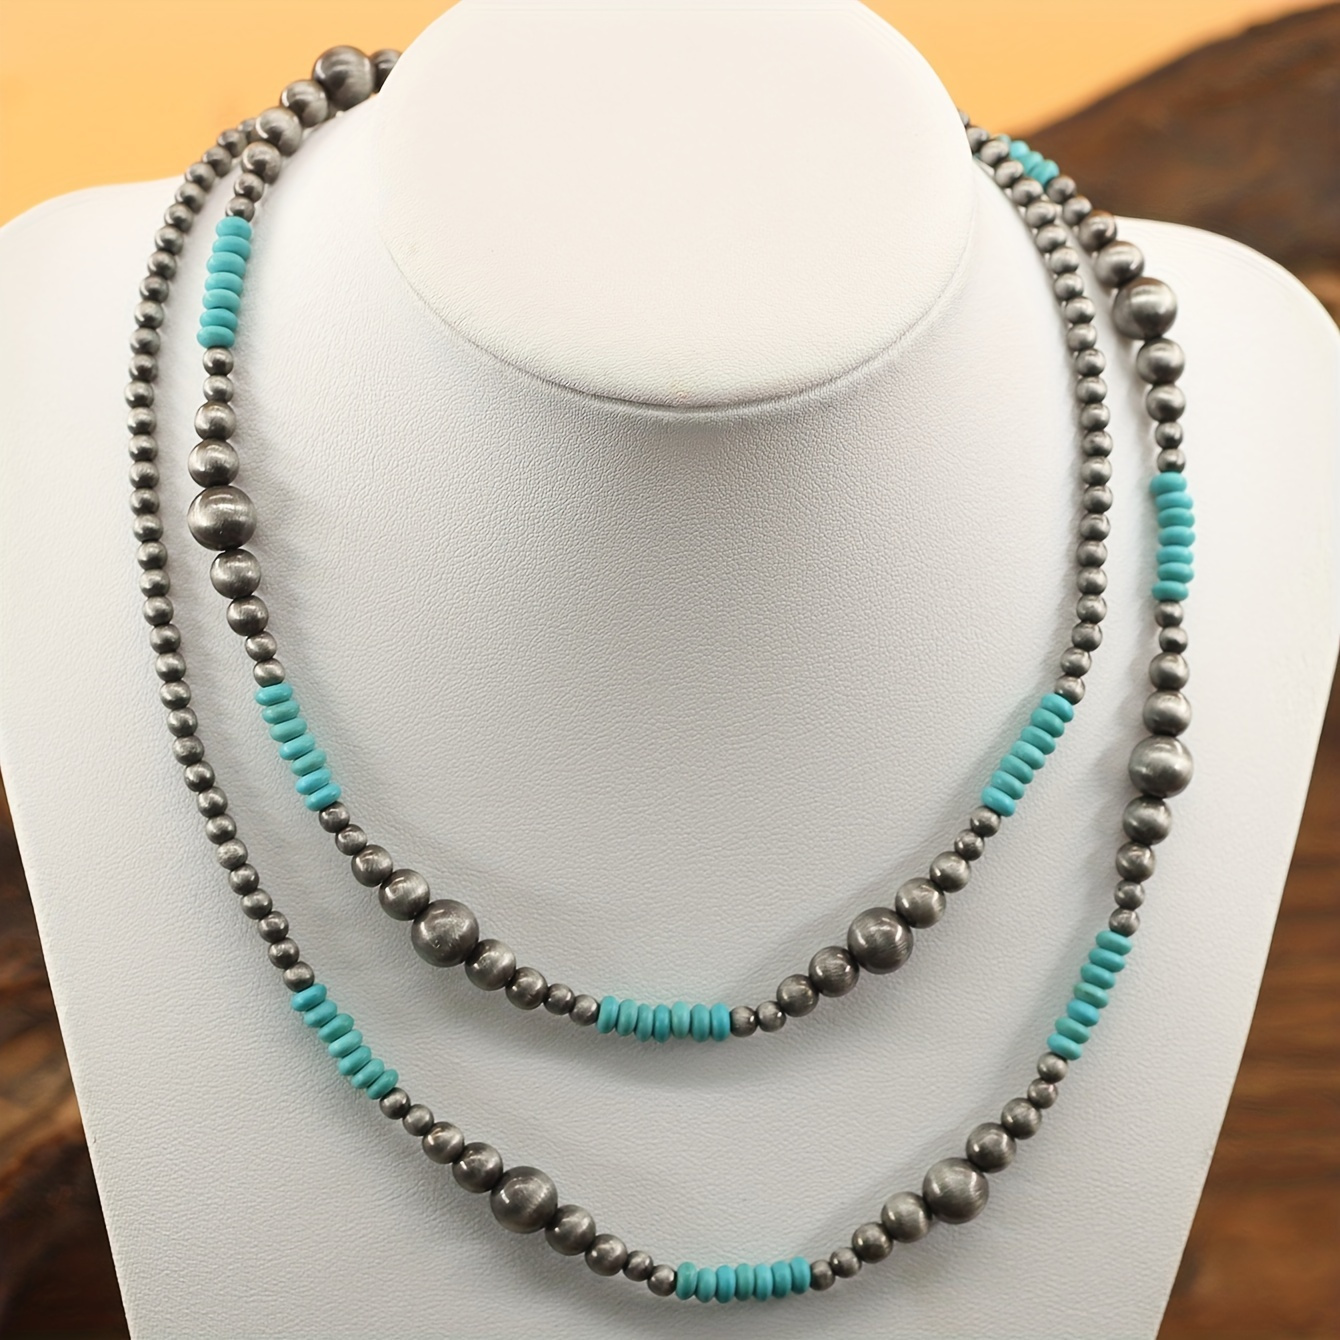 

Navajo Ccb 4mm/5mm Handmade Beads Turquoise Color Long Necklace Can Be Changed To 2 Loops Short Necklace 4 Loops Bracelet Retro Holiday Ornament